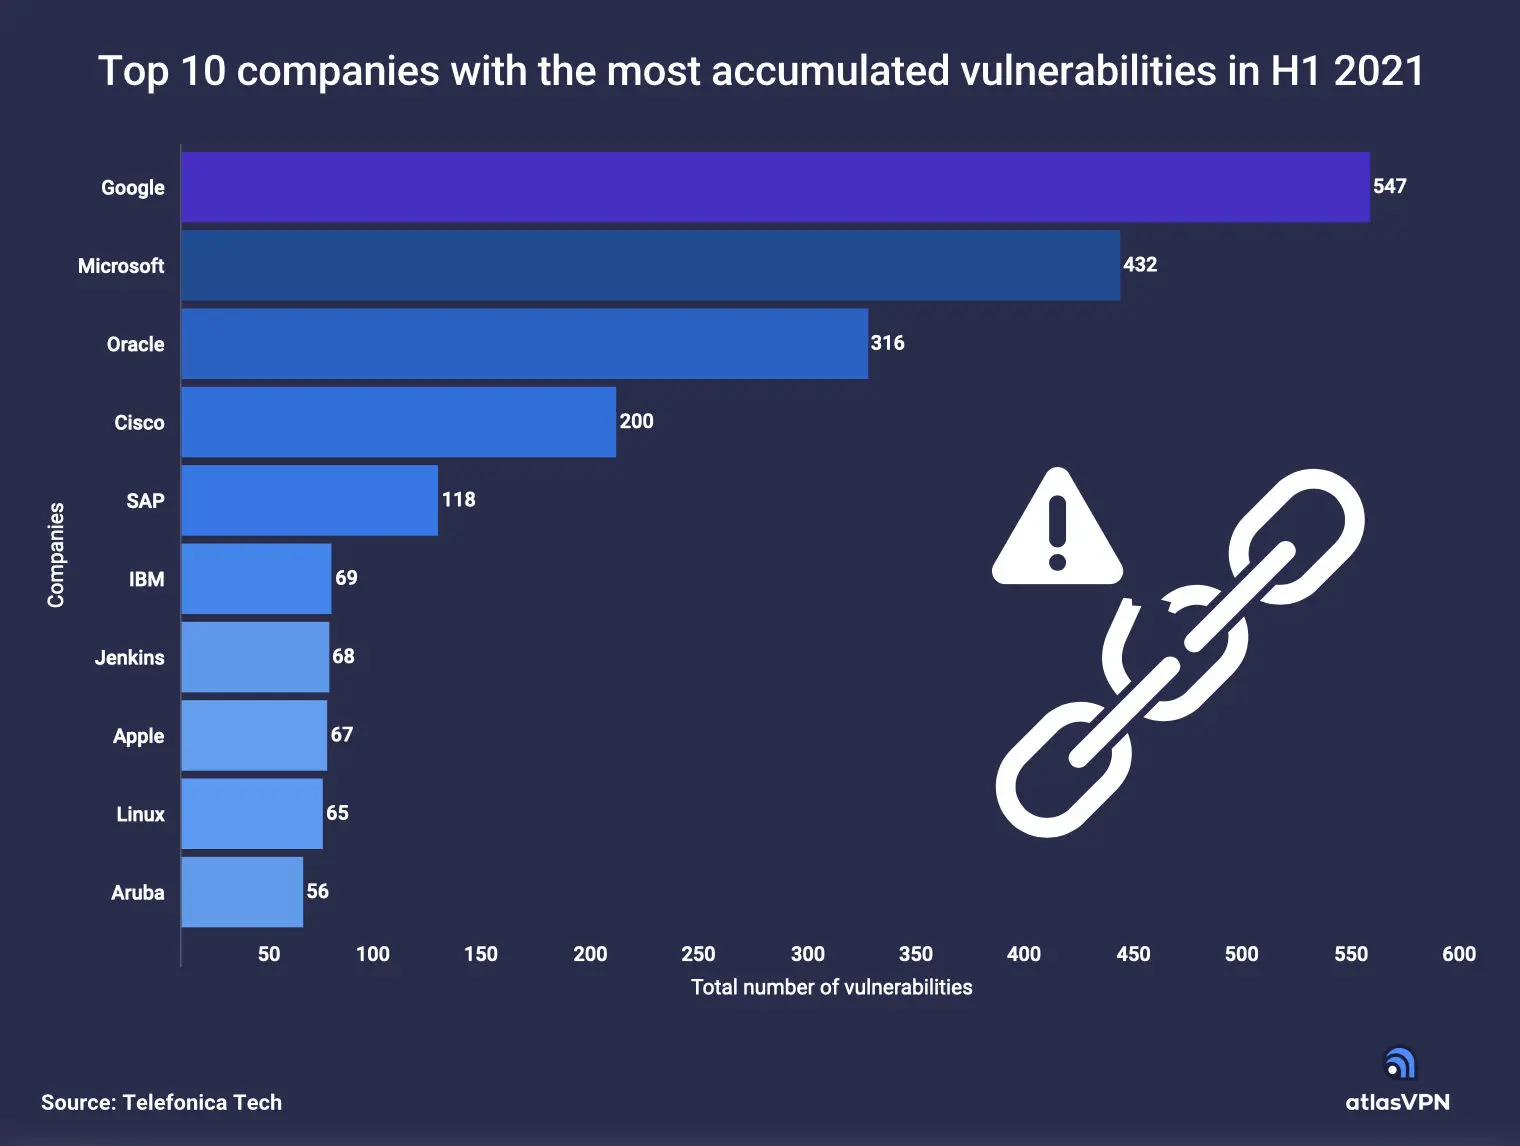 ontop.vn Google and Microsoft accumulated the most vulnerabilities in H1 2021